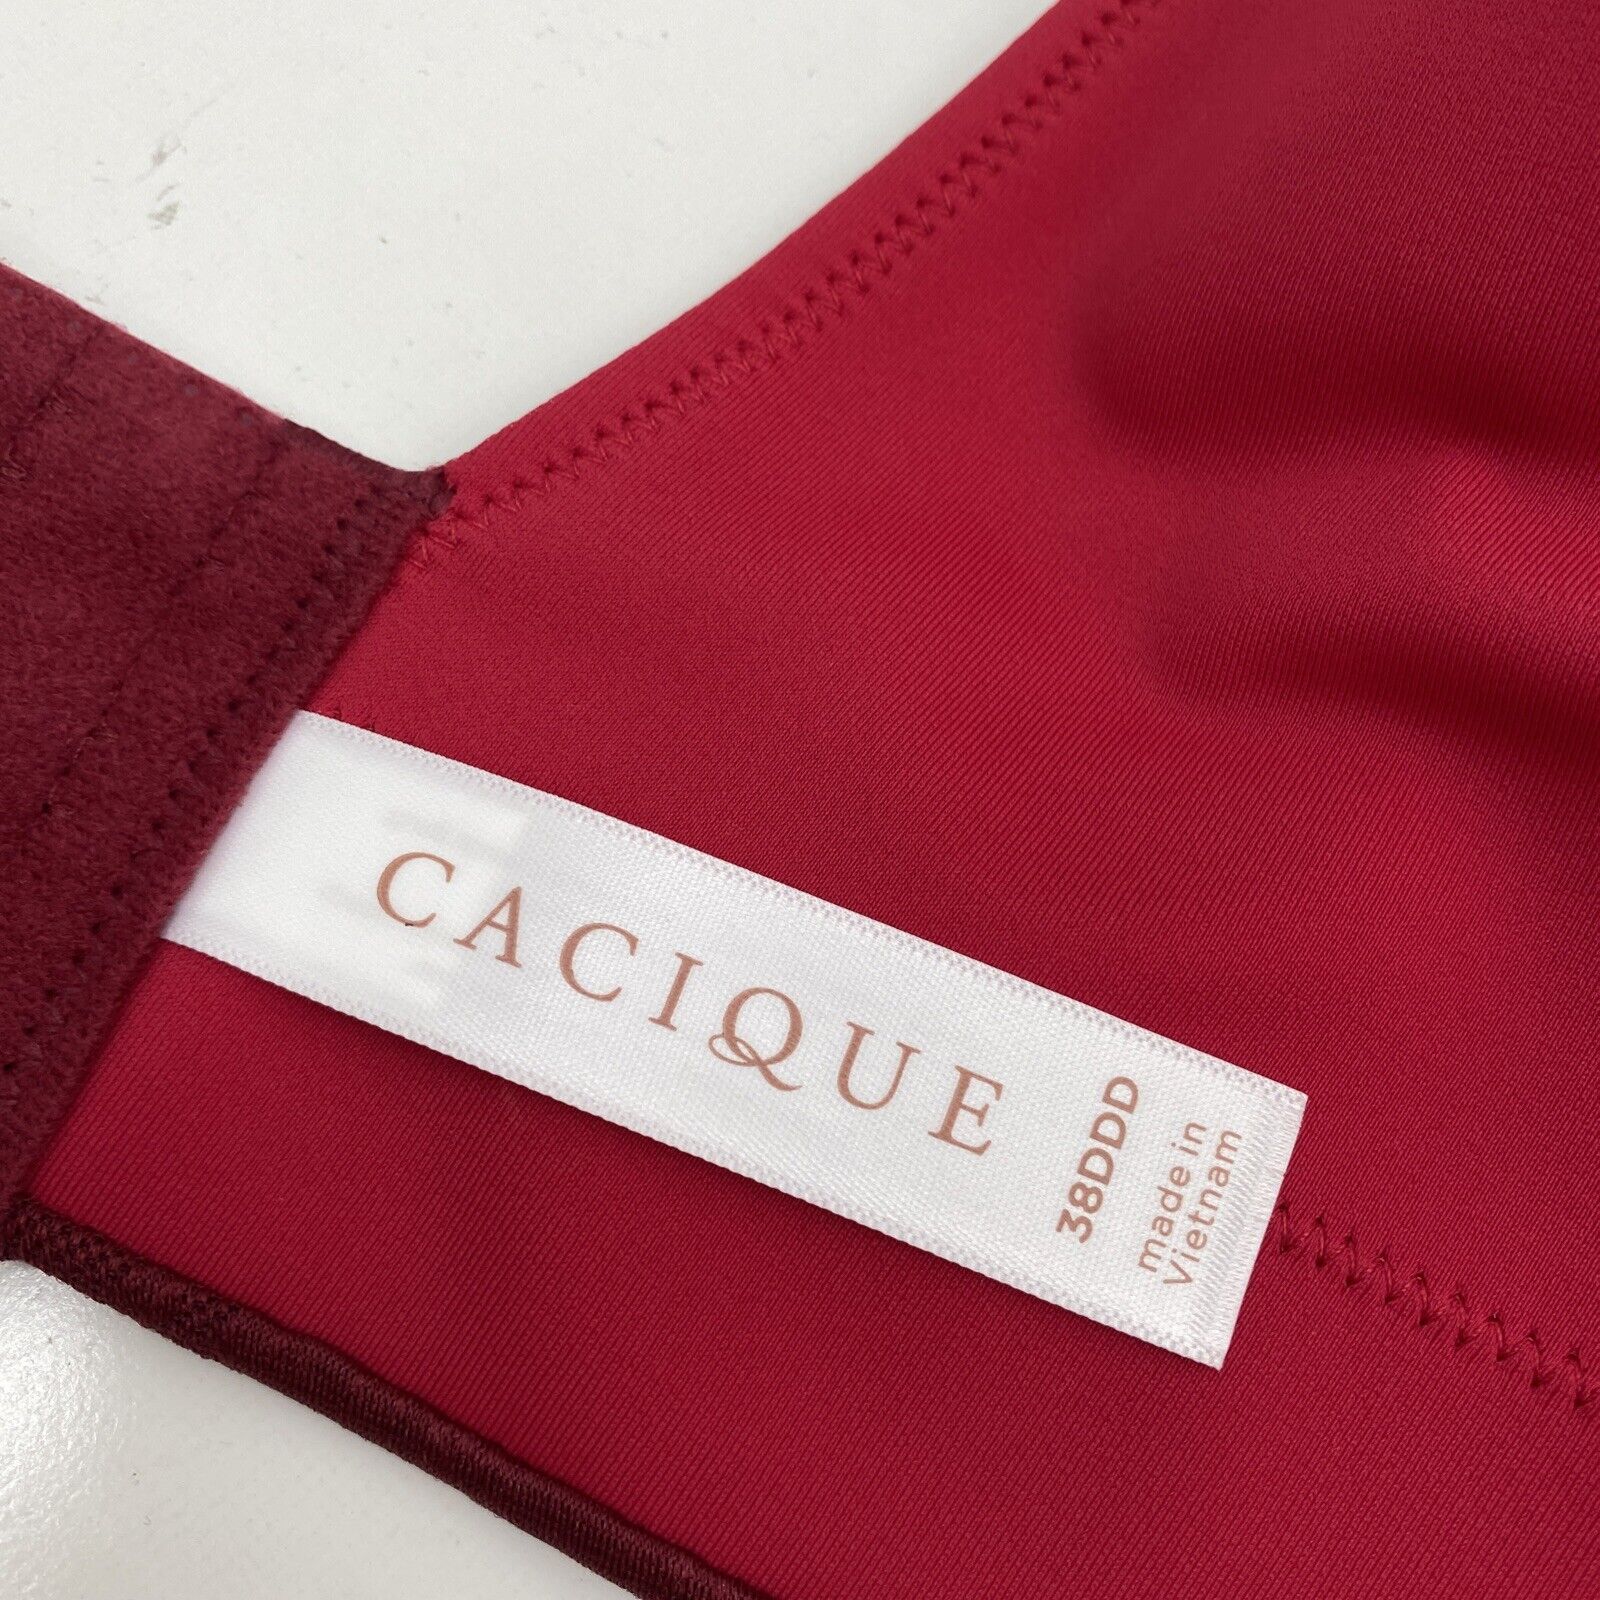 Cacique Invisible BackSmoother Lightly Lined Full Coverage Bra Red Siz -  beyond exchange